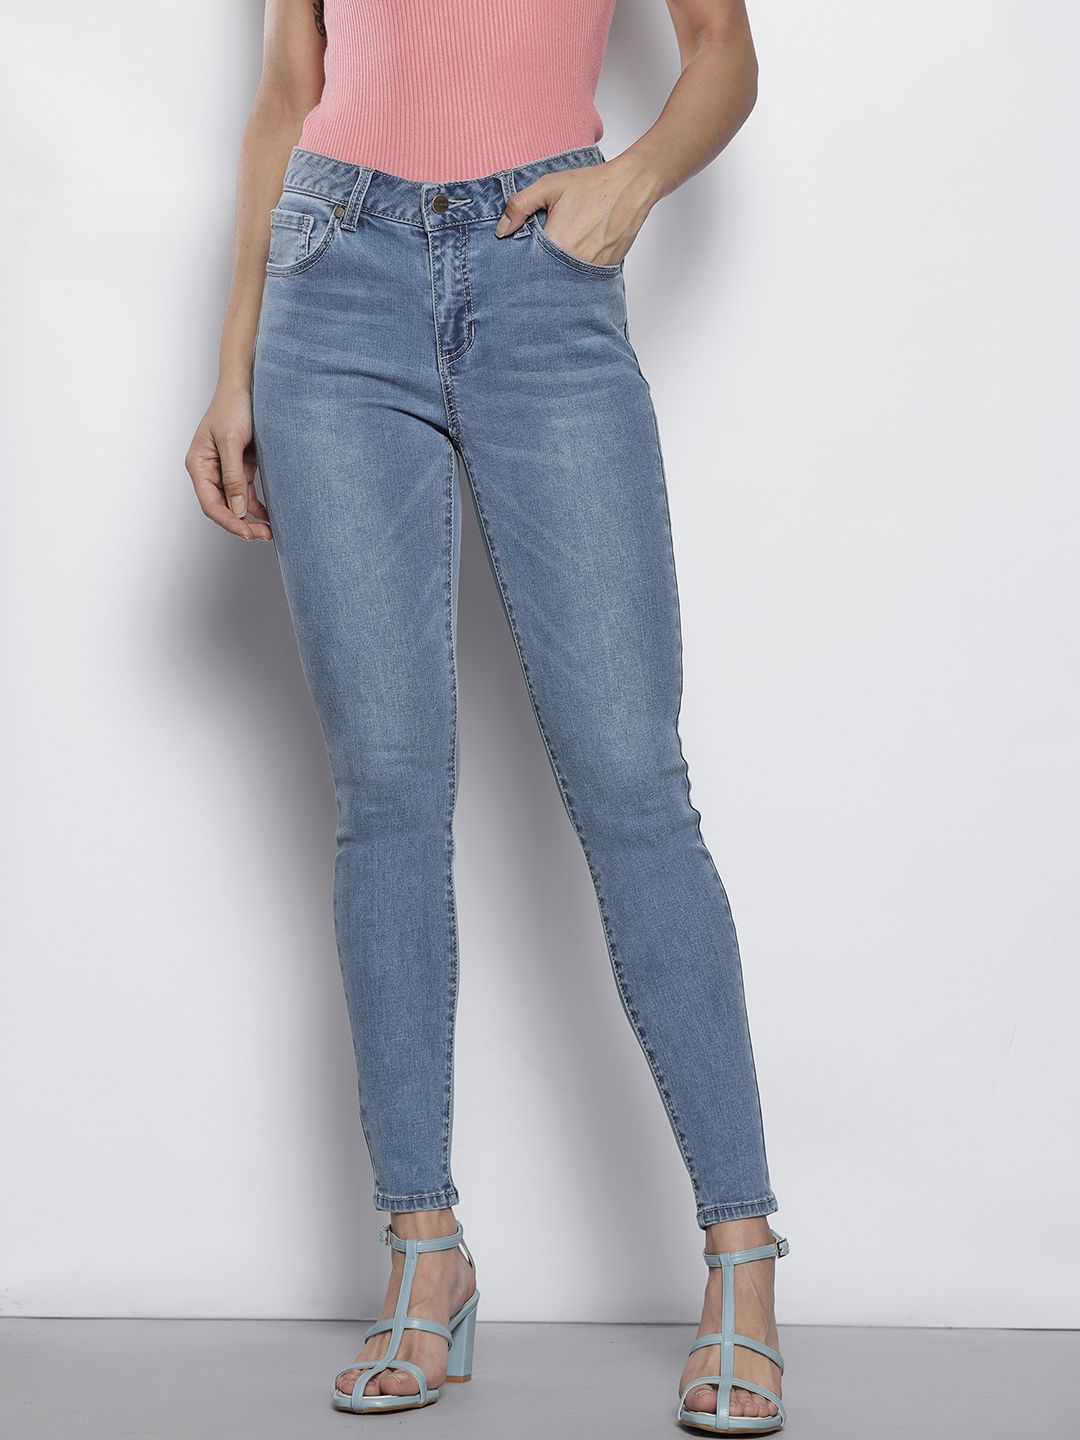 GUESS Women Blue Light Fade Jeans Price in India